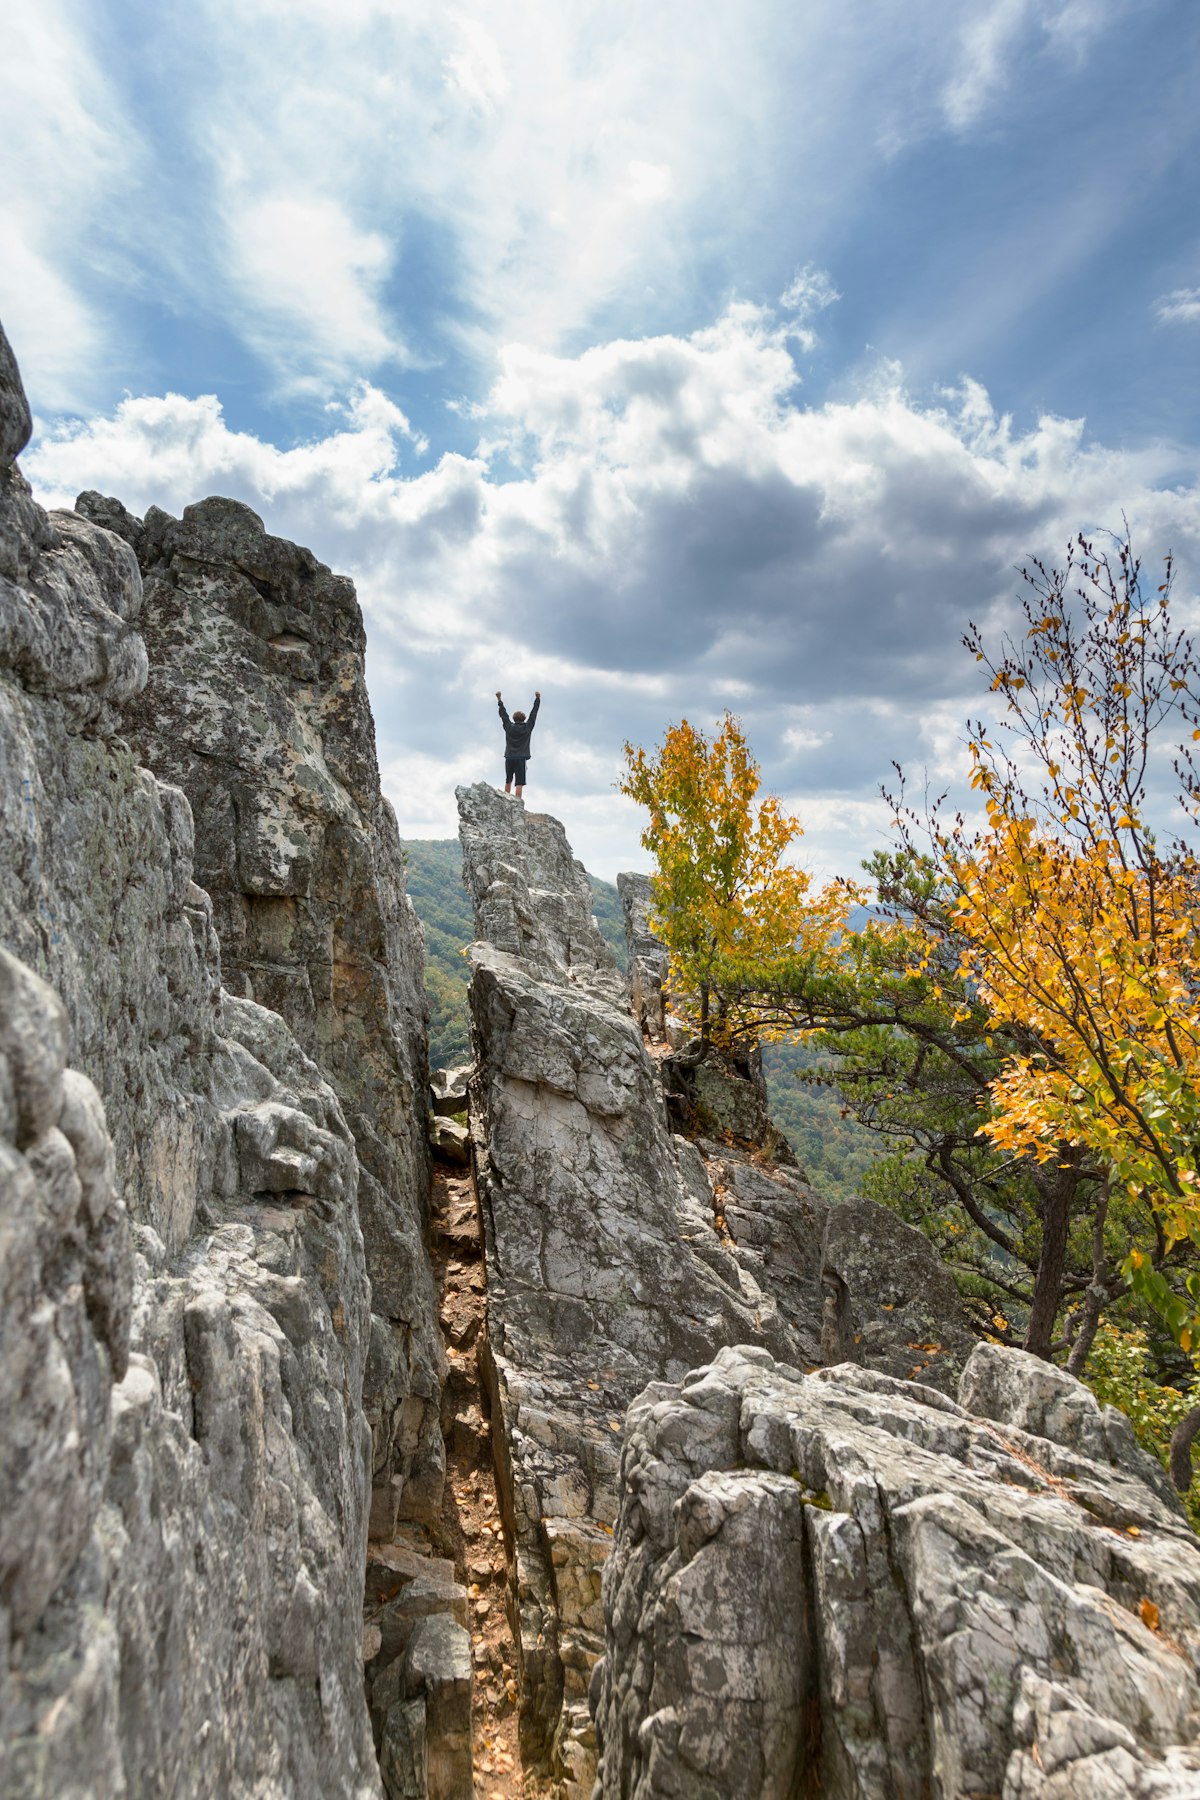 Climber standing on top of Seneca Rocks with his hands in the air.
567872638
autumn, boy, cheer, cliff, climb, climber, countryside, crag, destination, excited, exposed, exultant, fall, granite, happy, high, imposing, landmark, landscape, man, mountain, nature, notch, outdoors, peak, person, recreation, ridge, rock, rocky, rugged, rural, scenic, season, seneca rocks, stone, success, successful, summit, top, tourism, travel, trees, west virginia, wv, youth